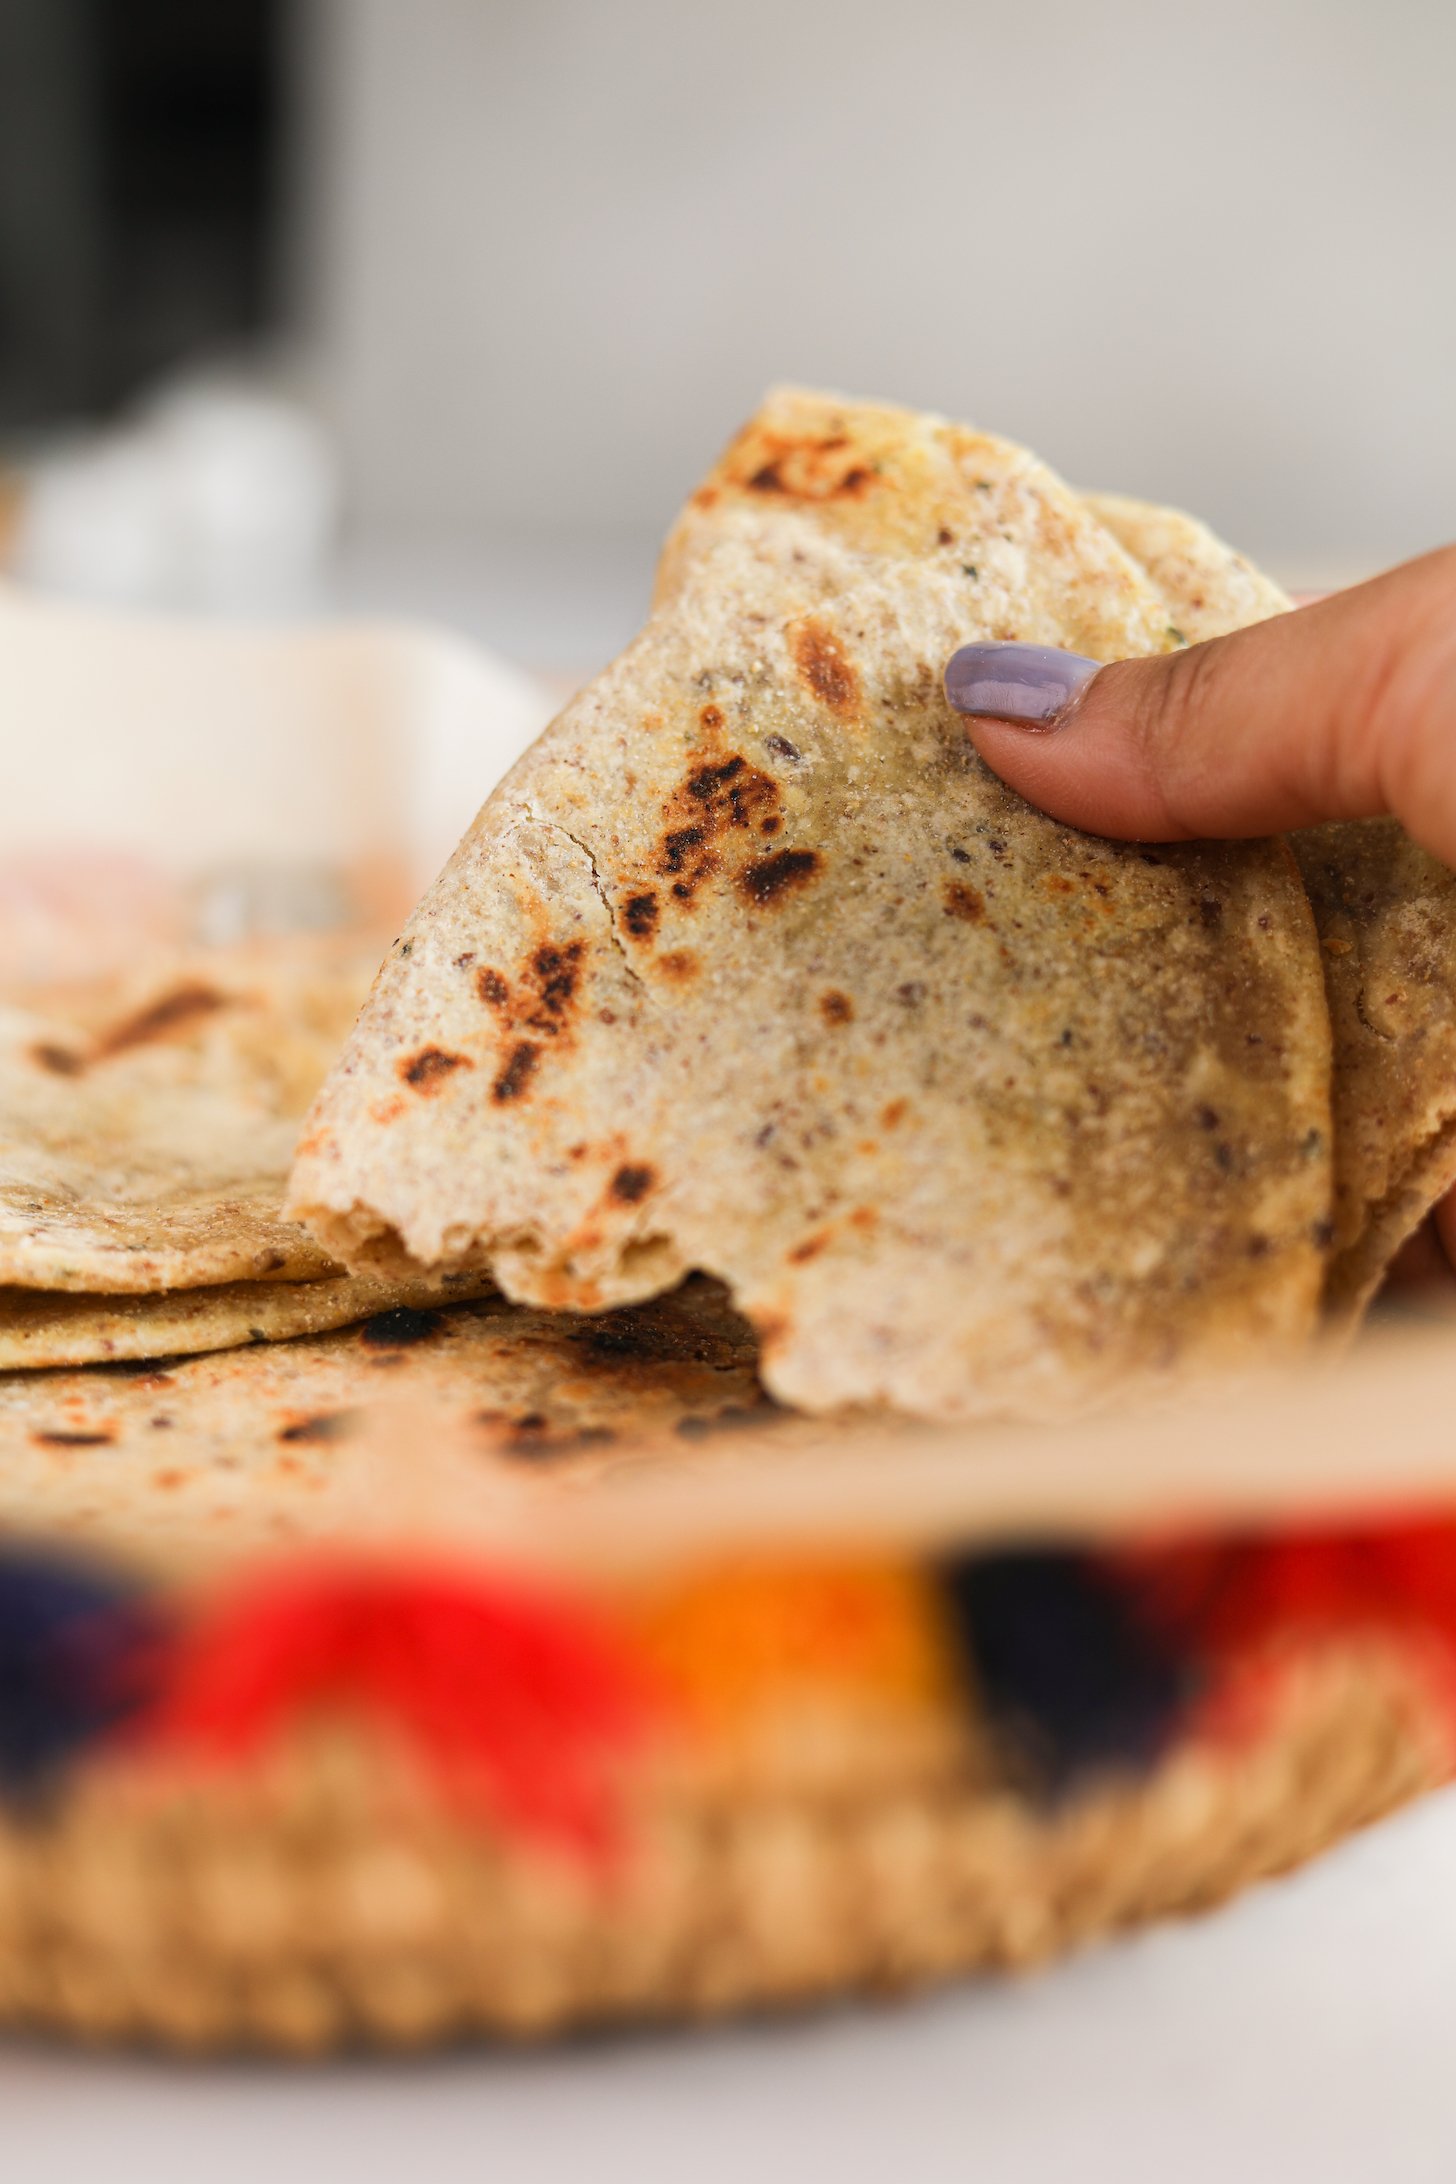 A hand holding a folded half of Indian flatbread - paratha in the colourful basket.